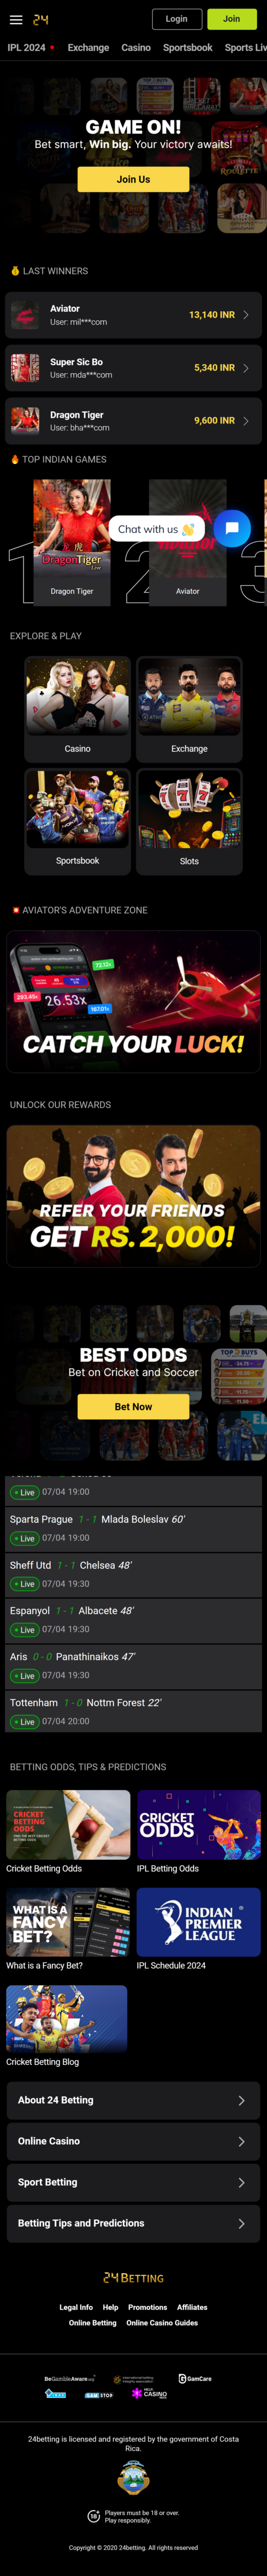 24betting India mobile